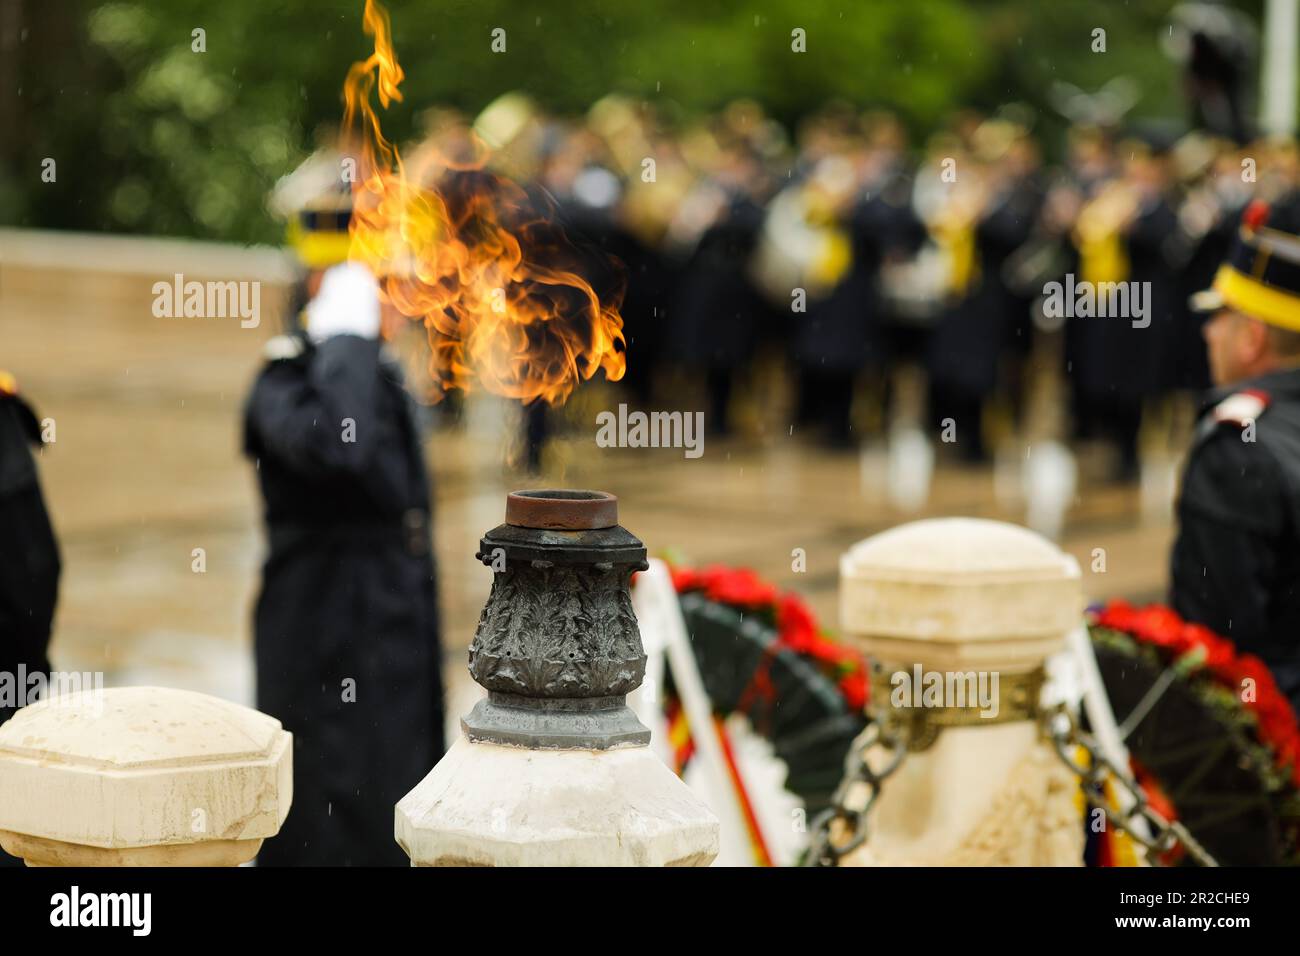 The eternal flame for the army heroes during a military ceremony in Bucharest, Romania, at the Tomb of the Unknown Soldier, during a rainy day. Stock Photo